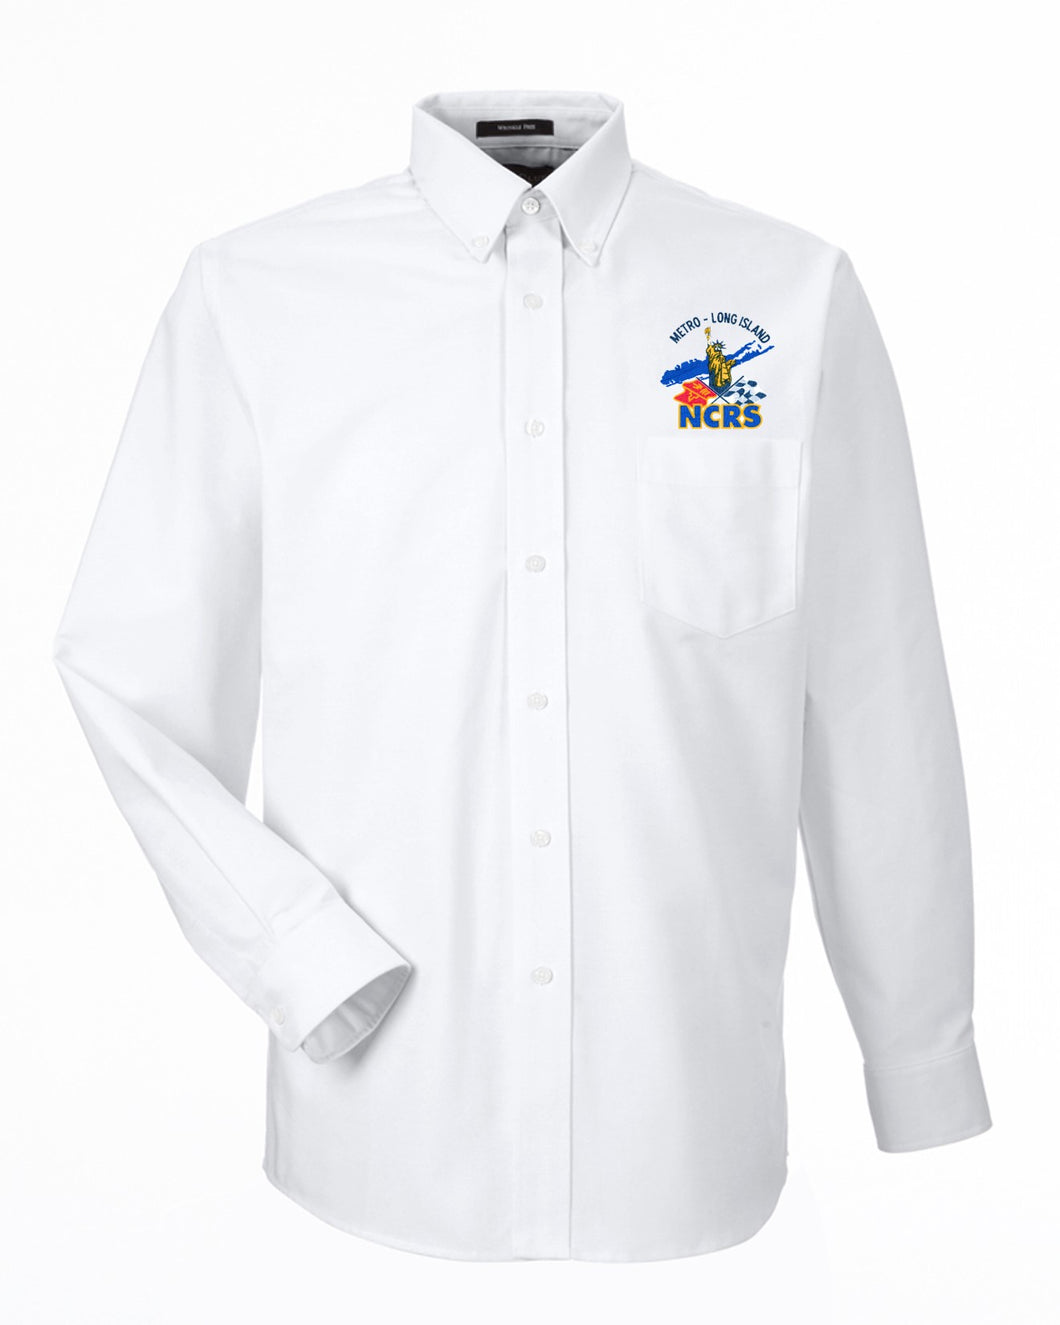 NCRS LONG ISLAND OXFORD BUTTON UP SHIRT